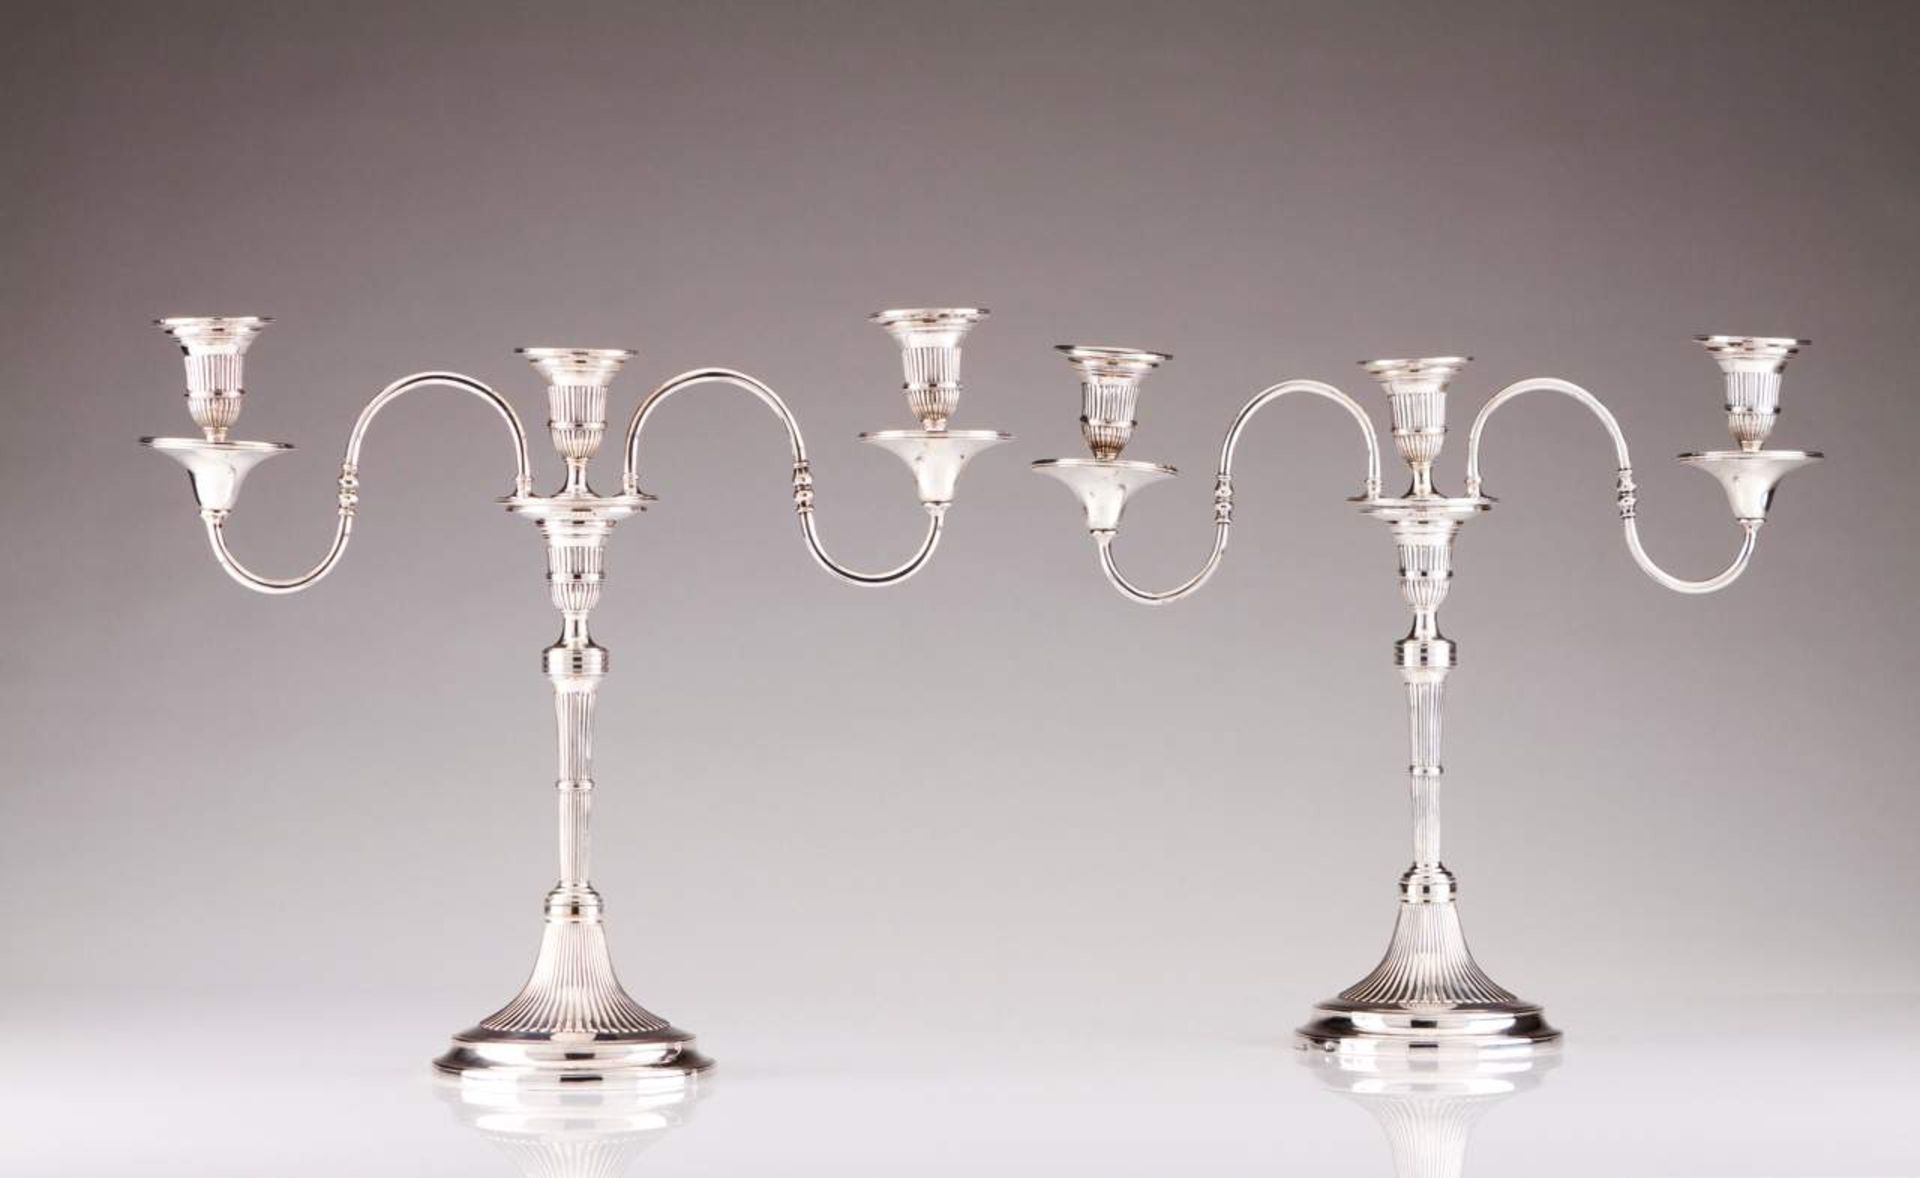 A pair of D. Maria (1777-1816) three-light candelabra Portuguese silver Fluted decoration with plain